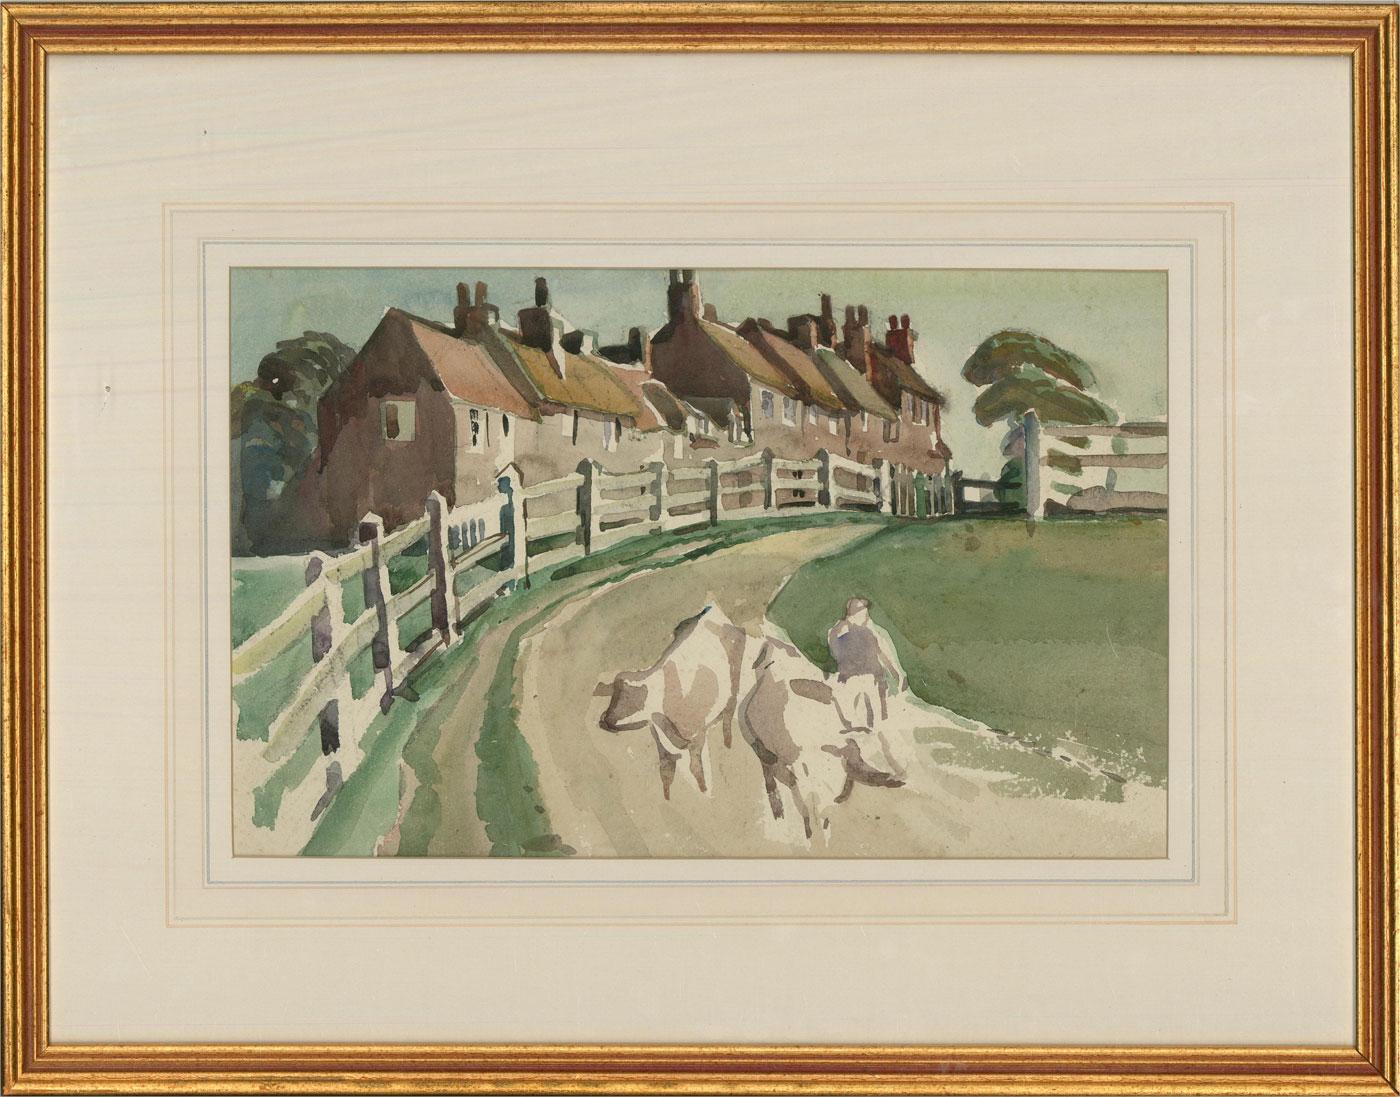 A delightful country scene depicting a farmer and cows making their way down a country road. In the background a row of houses stands against a clear blue sky. Tuck simplifies his shapes in this piece, using tone to add depth and detail to the